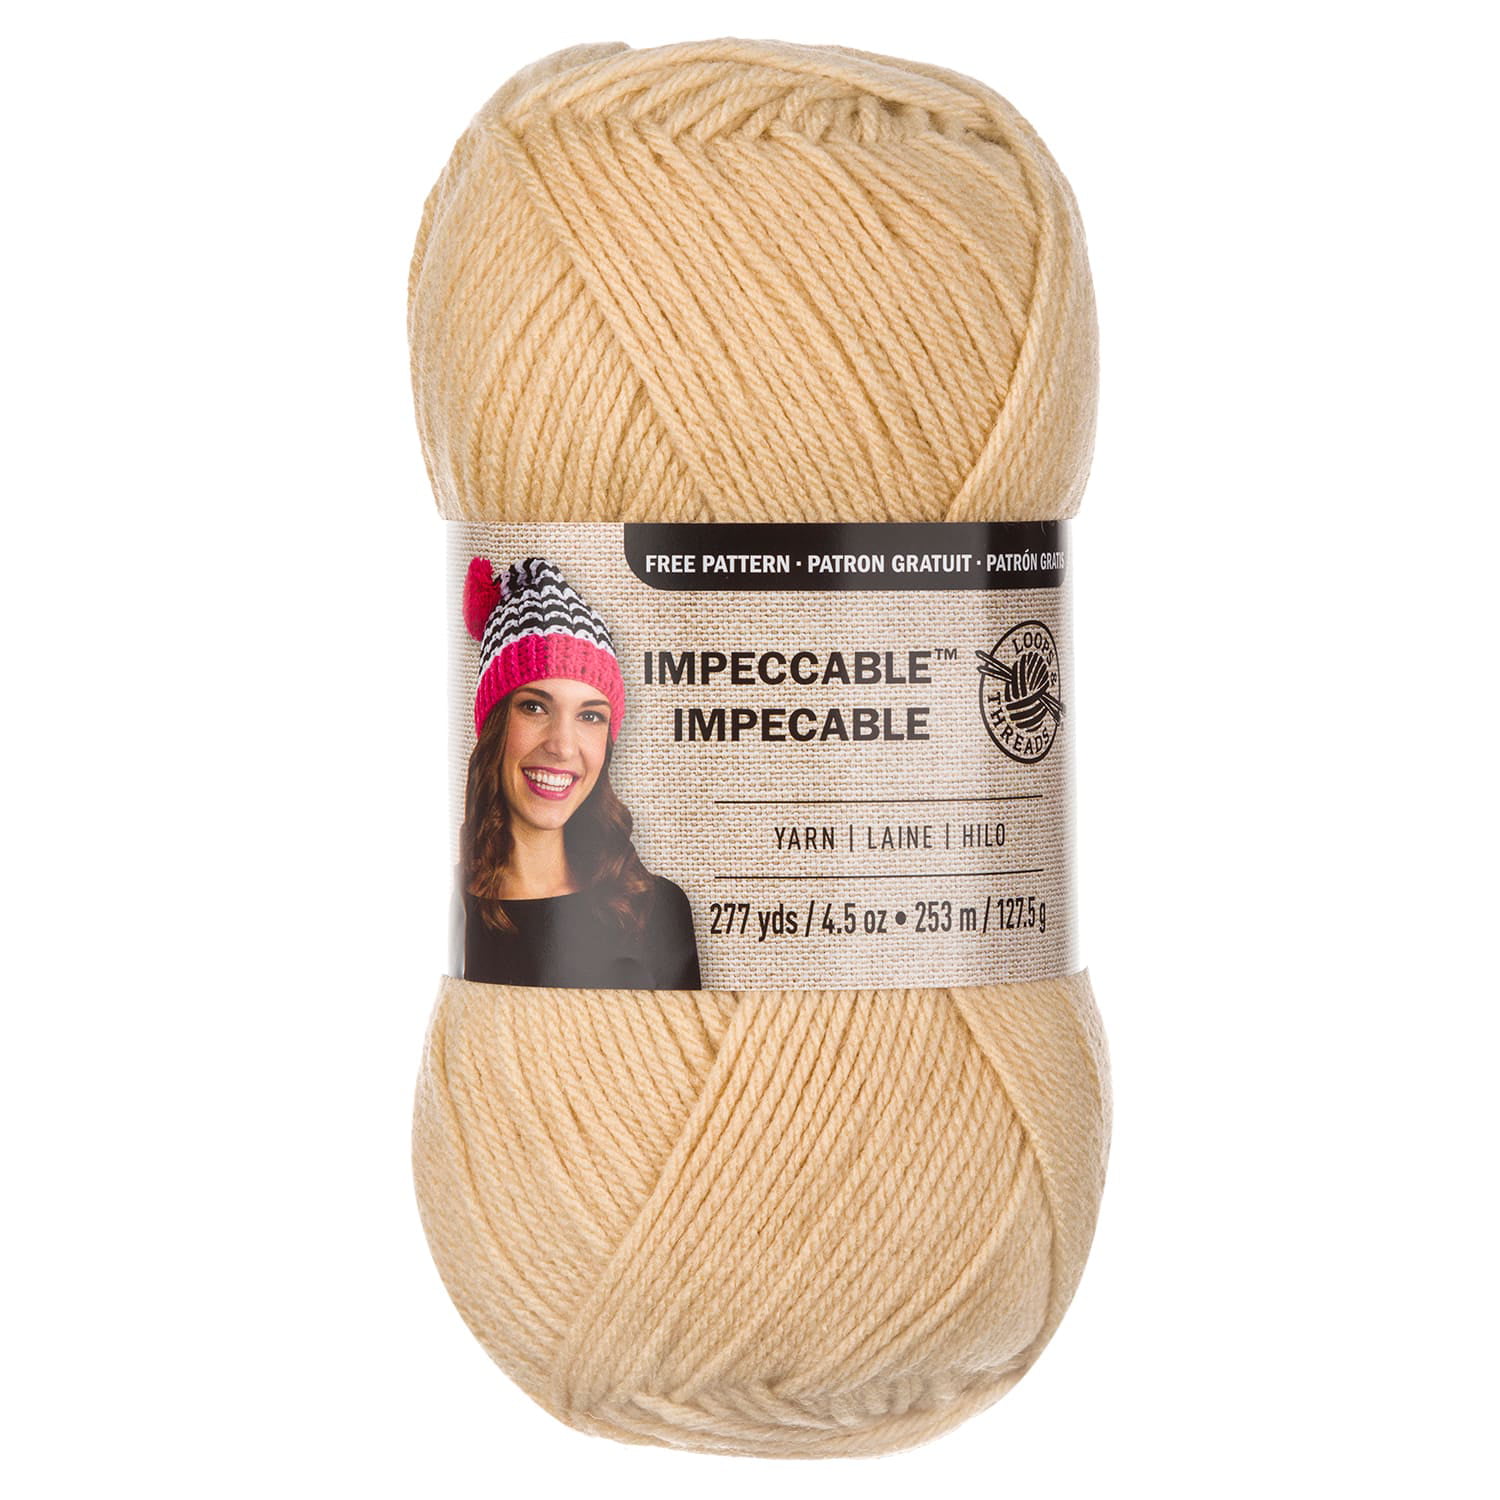 Supreme Fiber Fill by Loops & Threads™